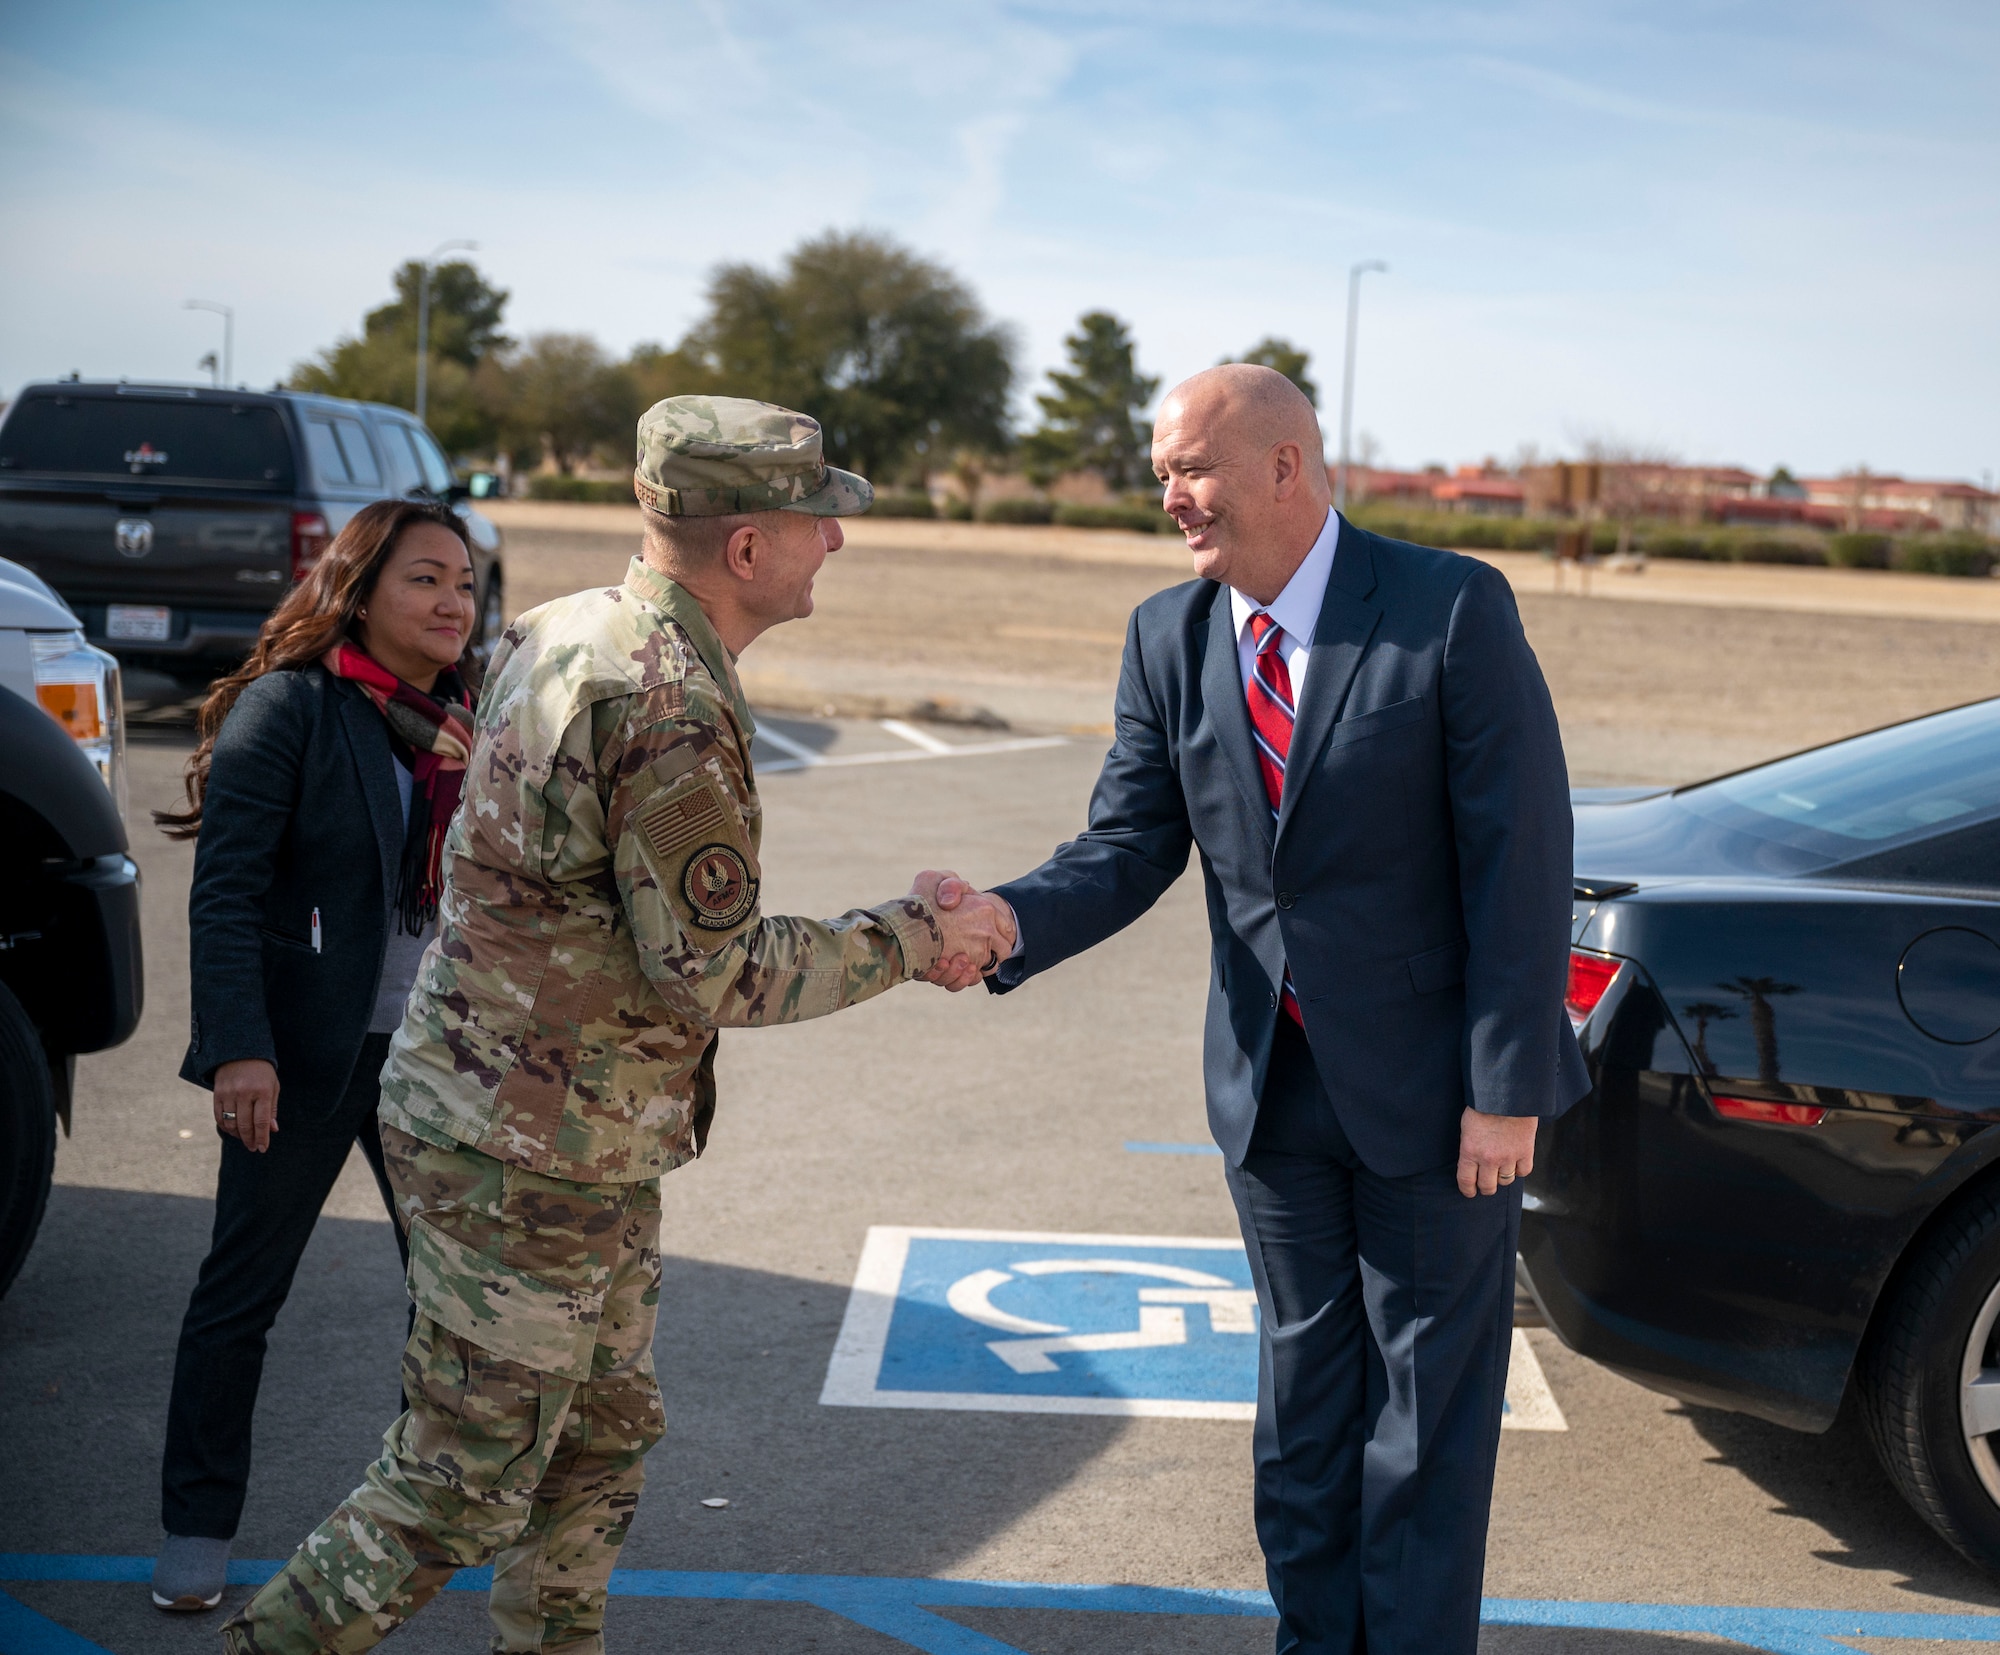 Lt. Gen. Carl E. Schaefer, Deputy Commander, Air Force Material Command shakes hands with Mr. William Brown, Community Support Coordinator while visiting the new Helping Agencies facility at Edwards Air Force Base, California, Dec. 15.